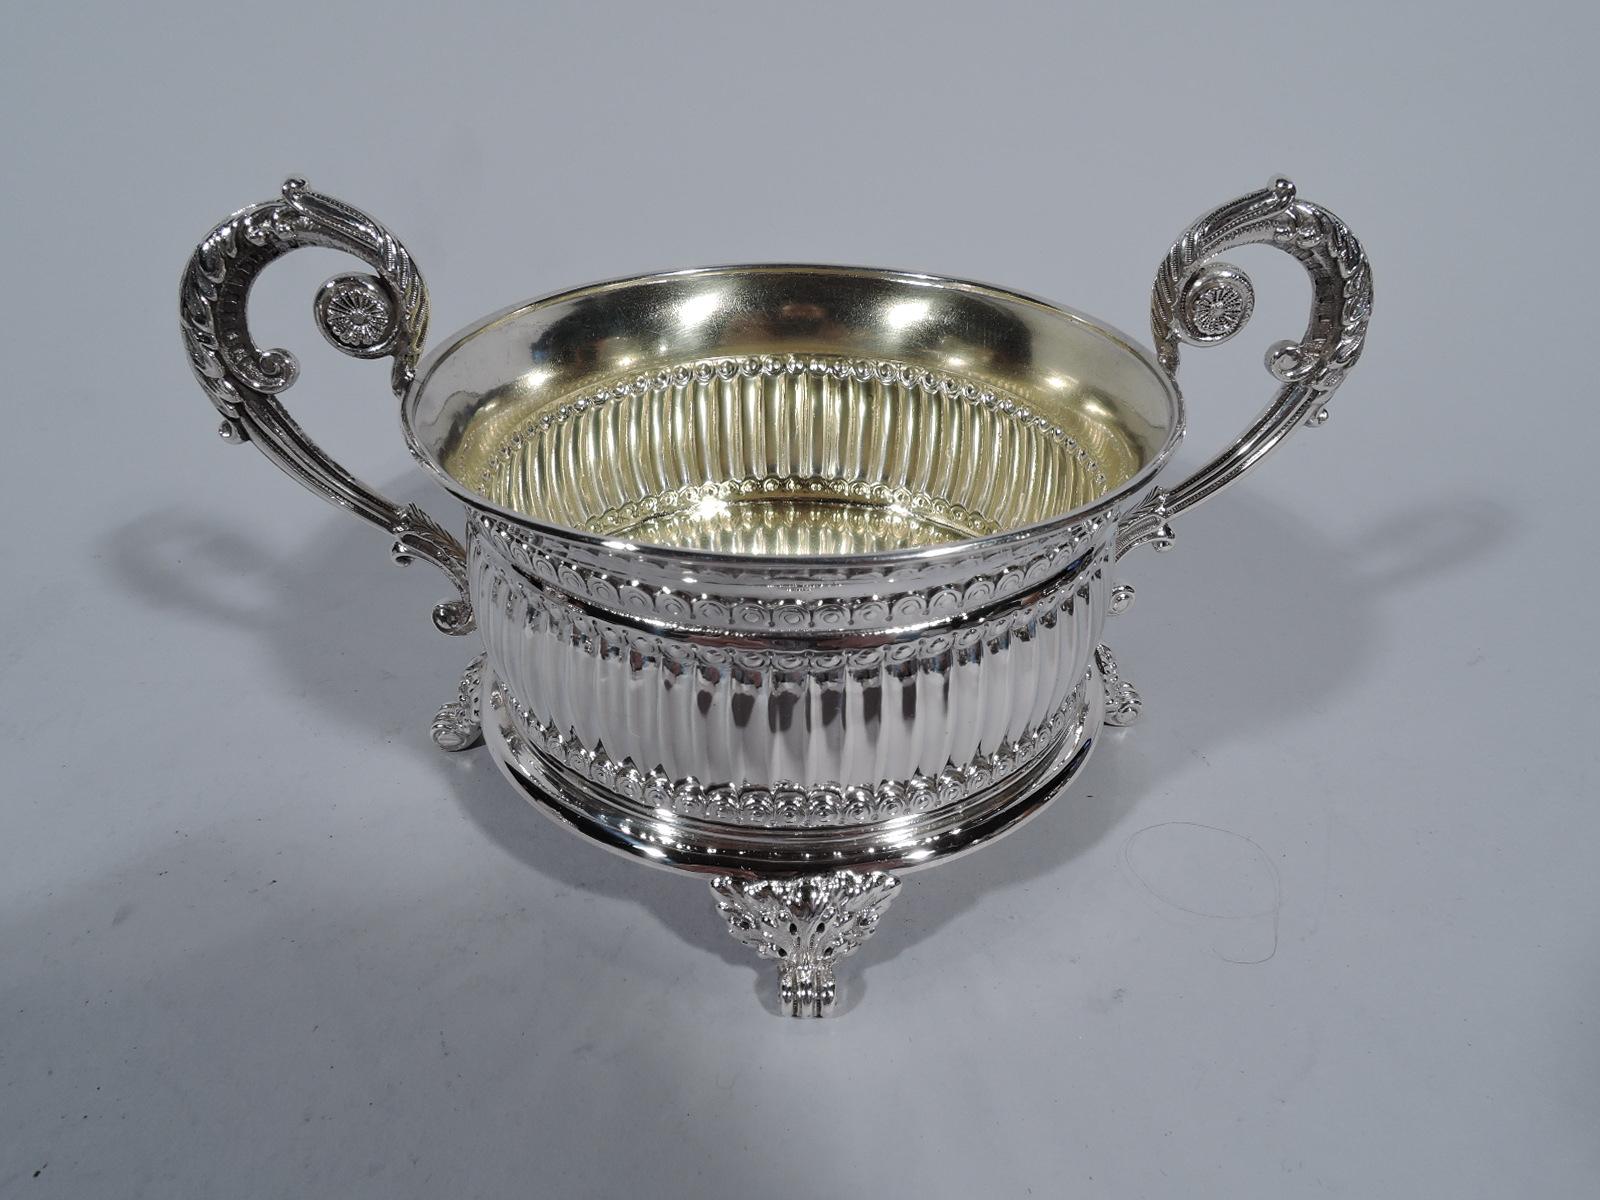 19th Century Antique Neoclassical Sterling Silver Creamer and Sugar by Tiffany